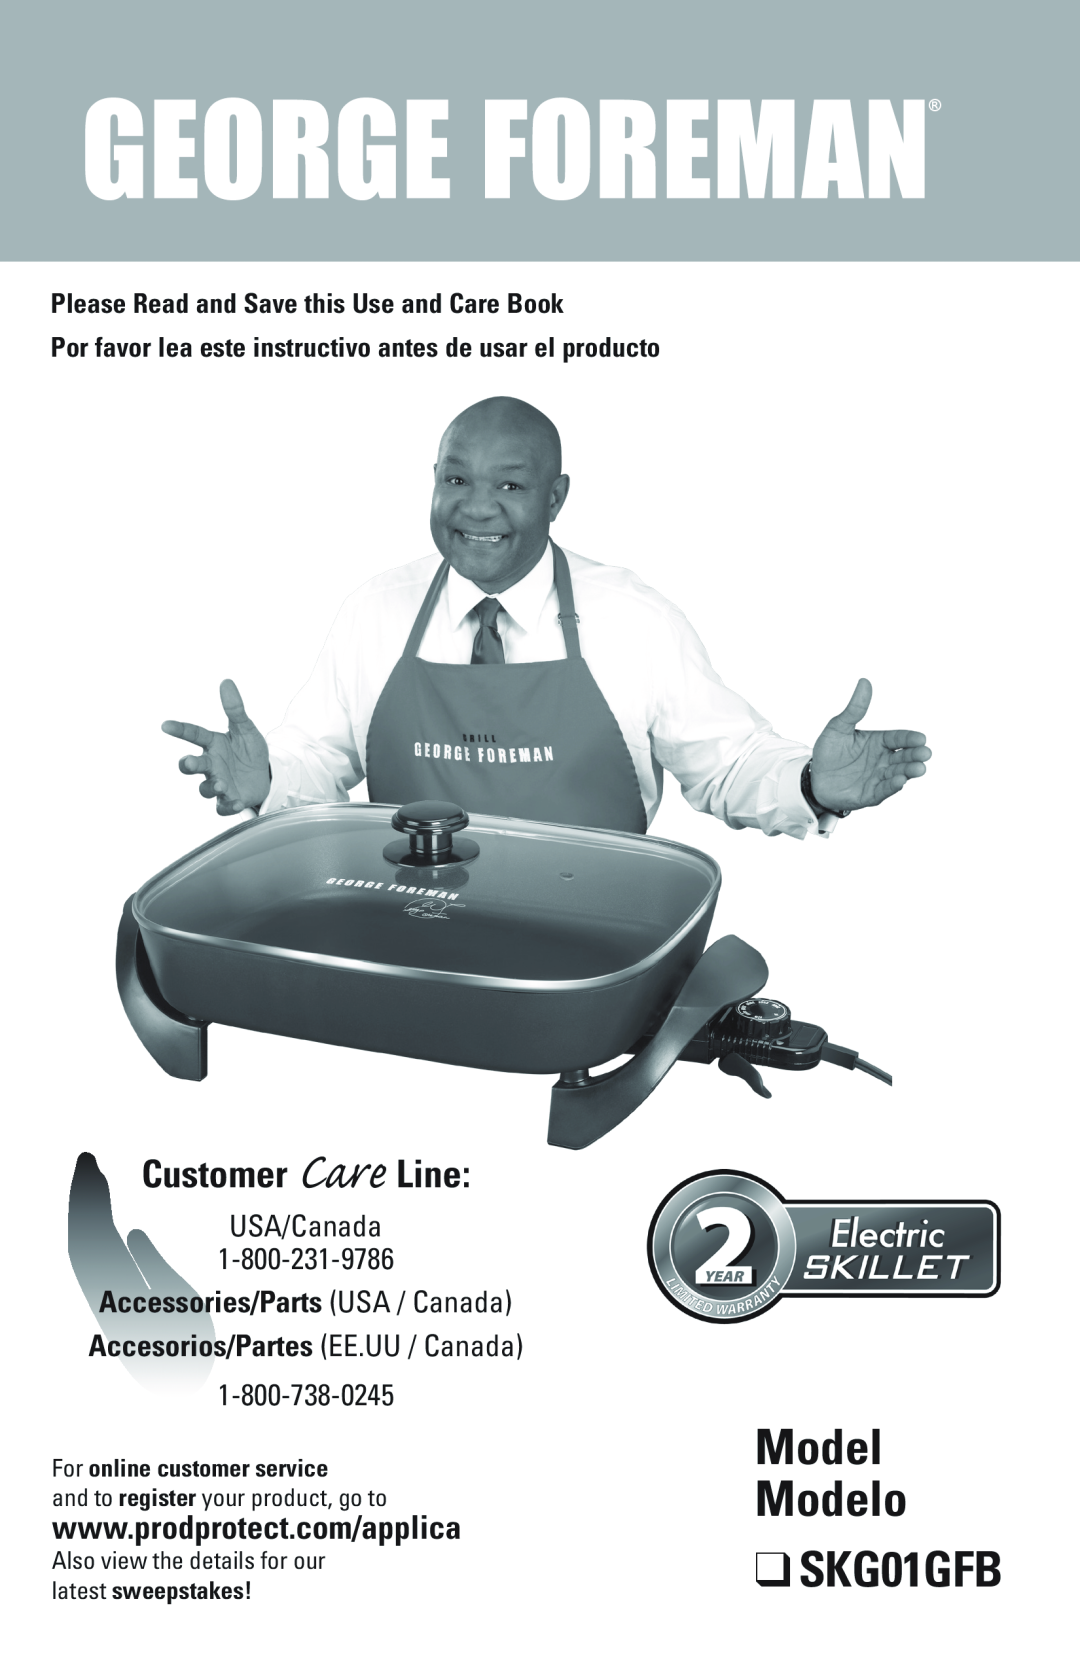 George Foreman manual Model Modelo SKG01GFB, Customer Care Line, Please Read and Save this Use and Care Book 